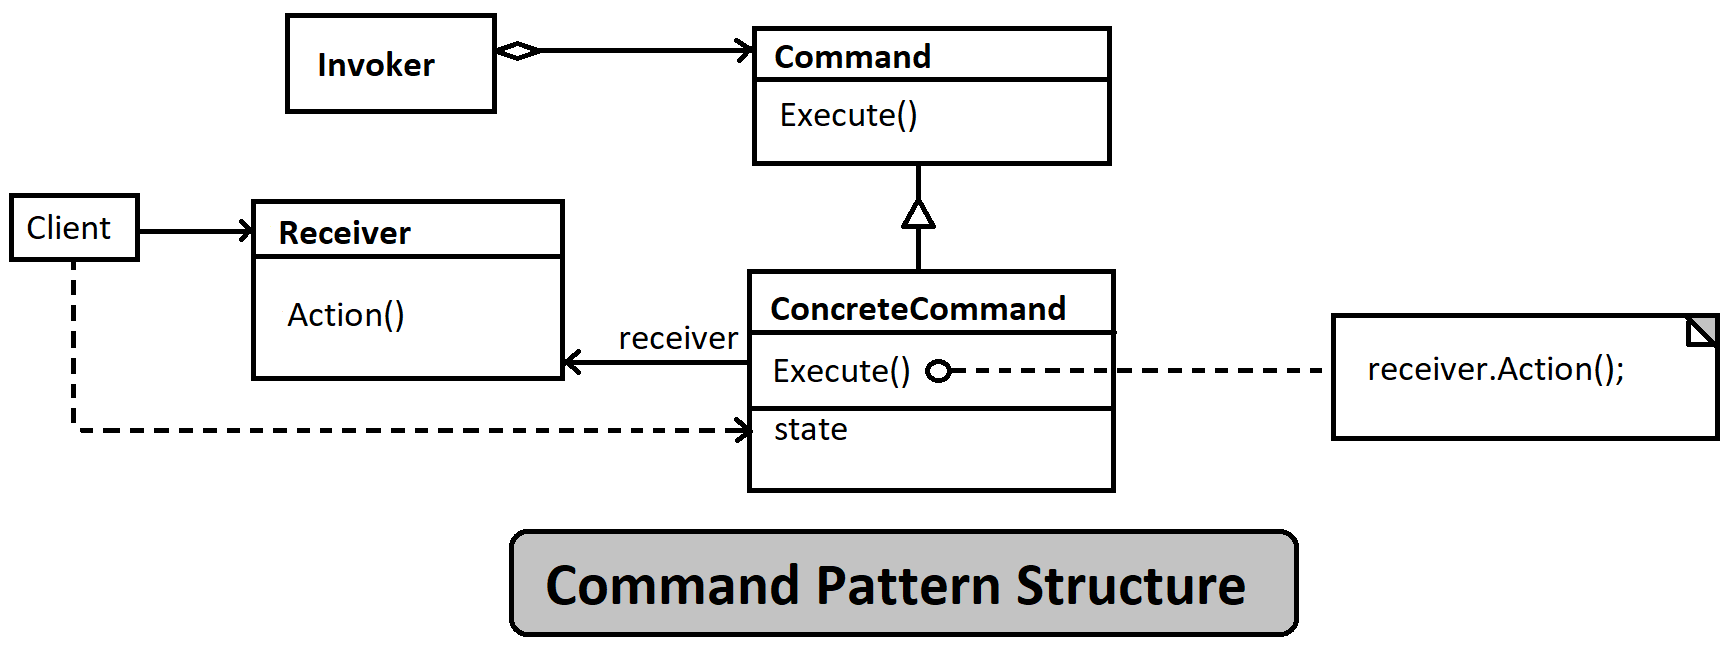 Command Pattern Structure